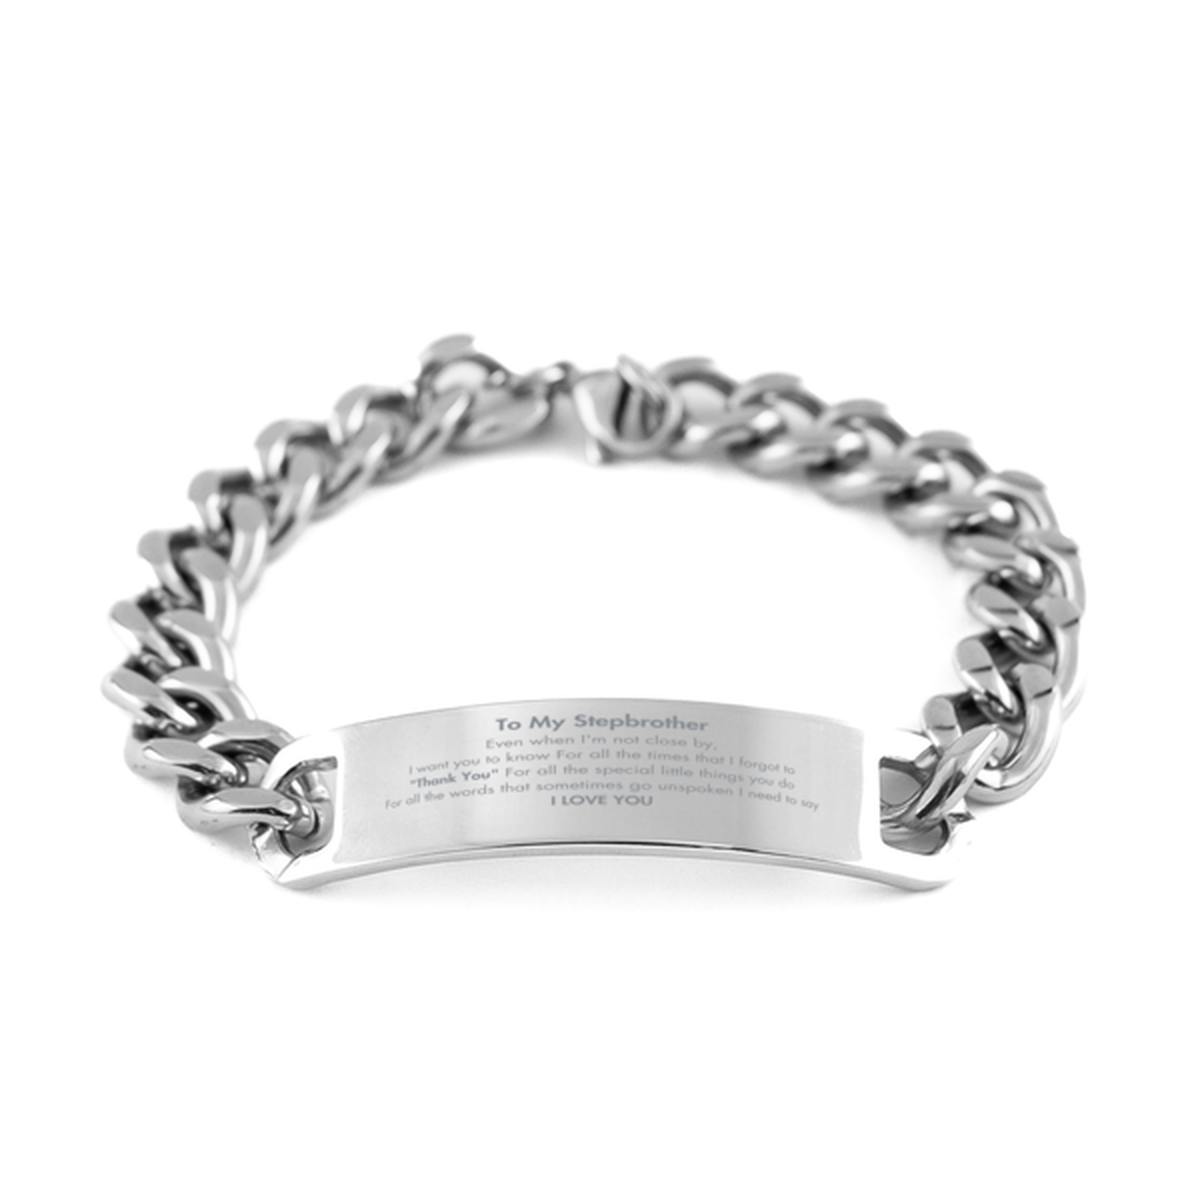 Thank You Gifts for Stepbrother, Keepsake Cuban Chain Stainless Steel Bracelet Gifts for Stepbrother Birthday Mother's day Father's Day Stepbrother For all the words That sometimes go unspoken I need to say I LOVE YOU